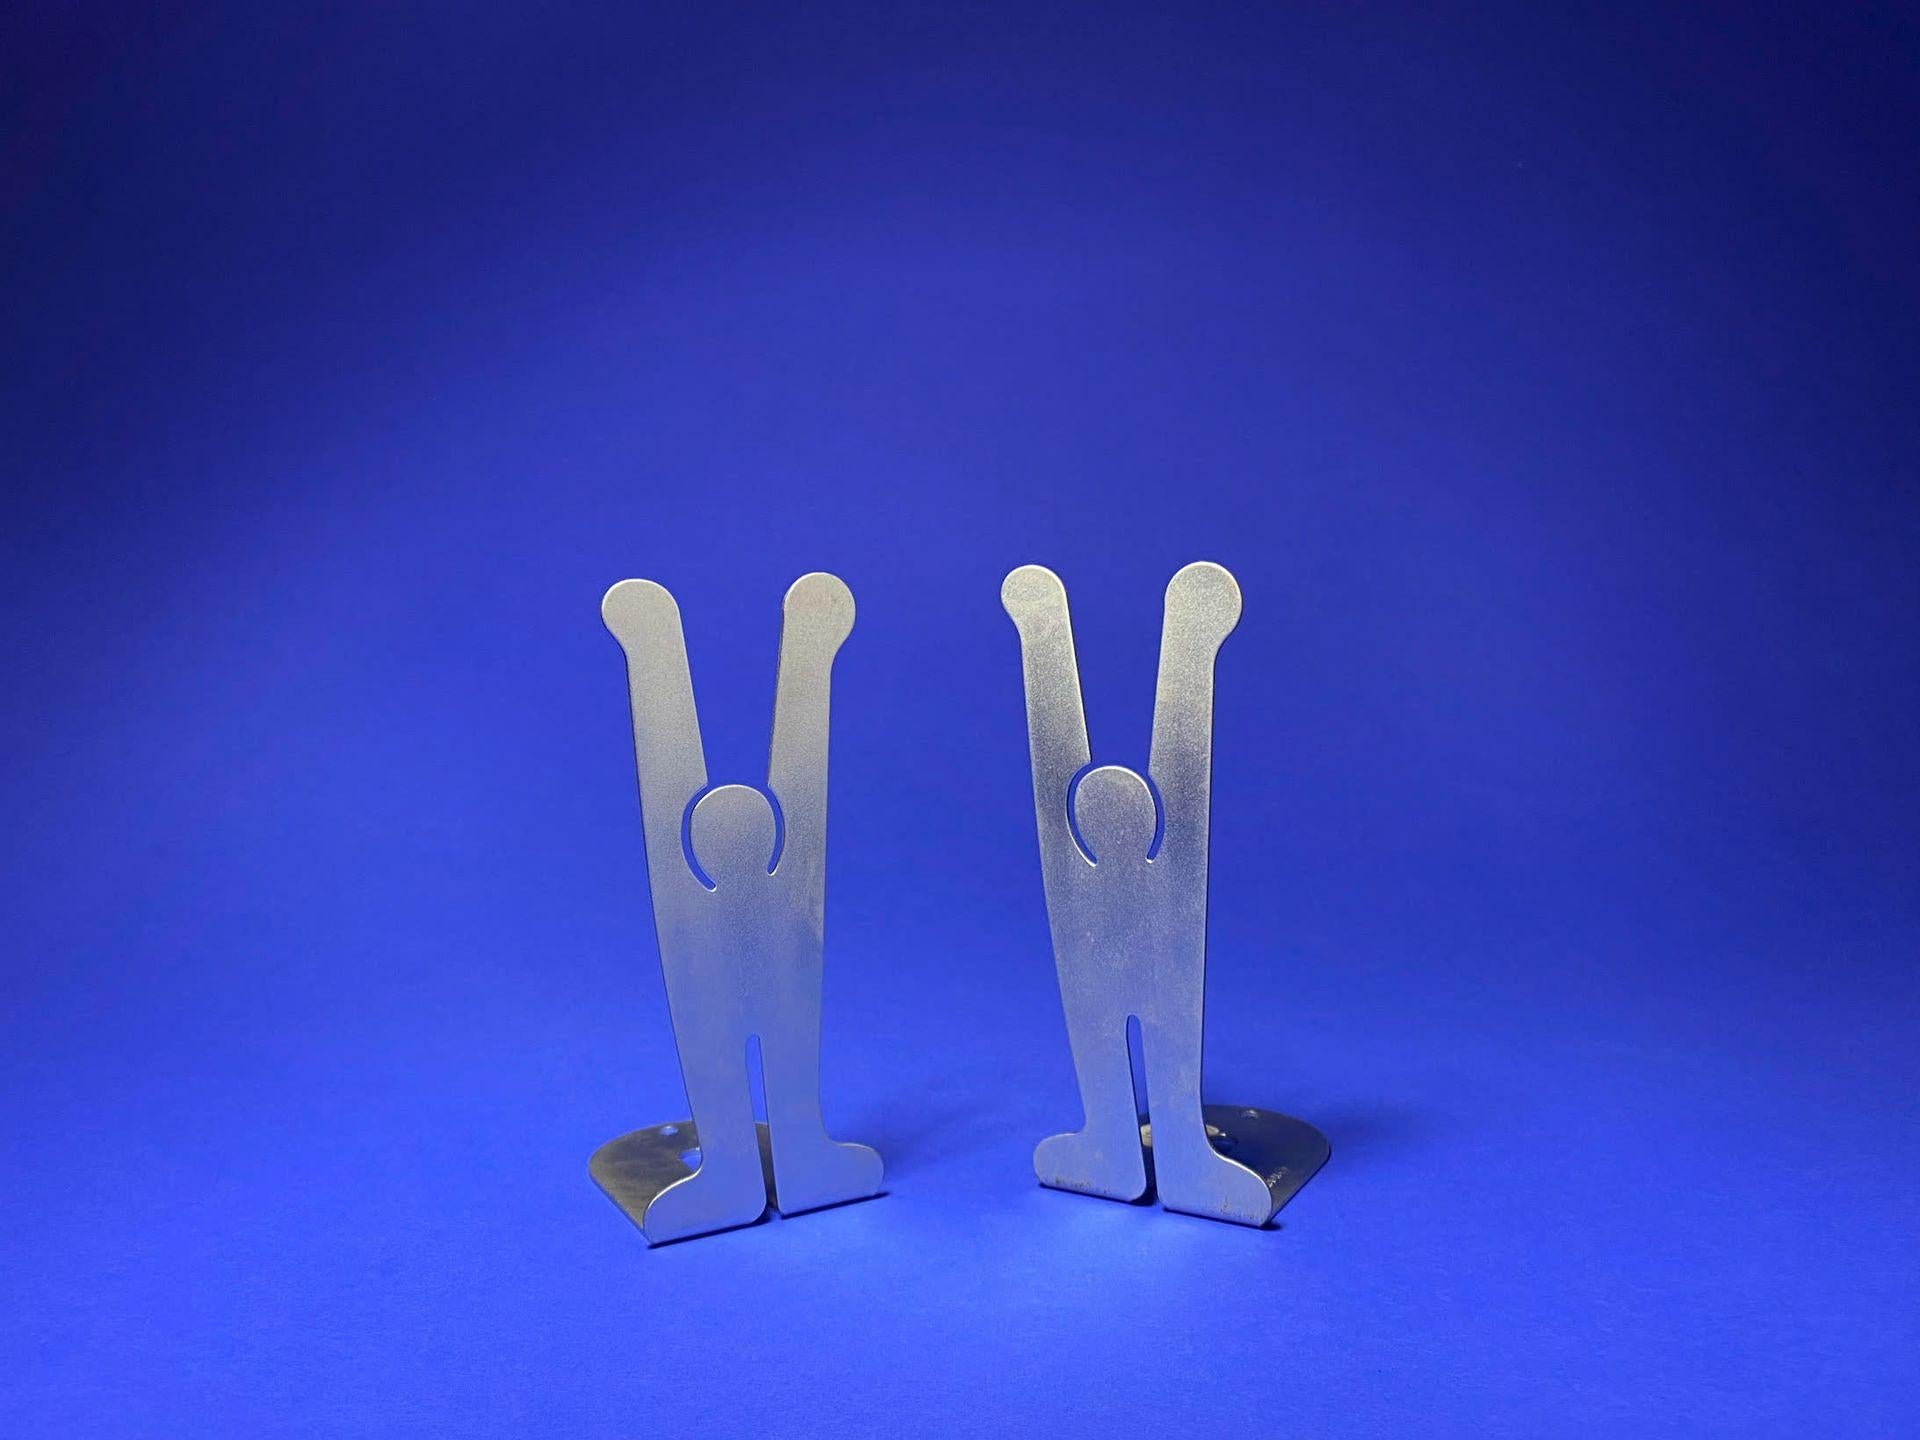 Silhouette with raised arms designed by Keith Harring .Pair of brushed metal bookends marked Keith Harring .